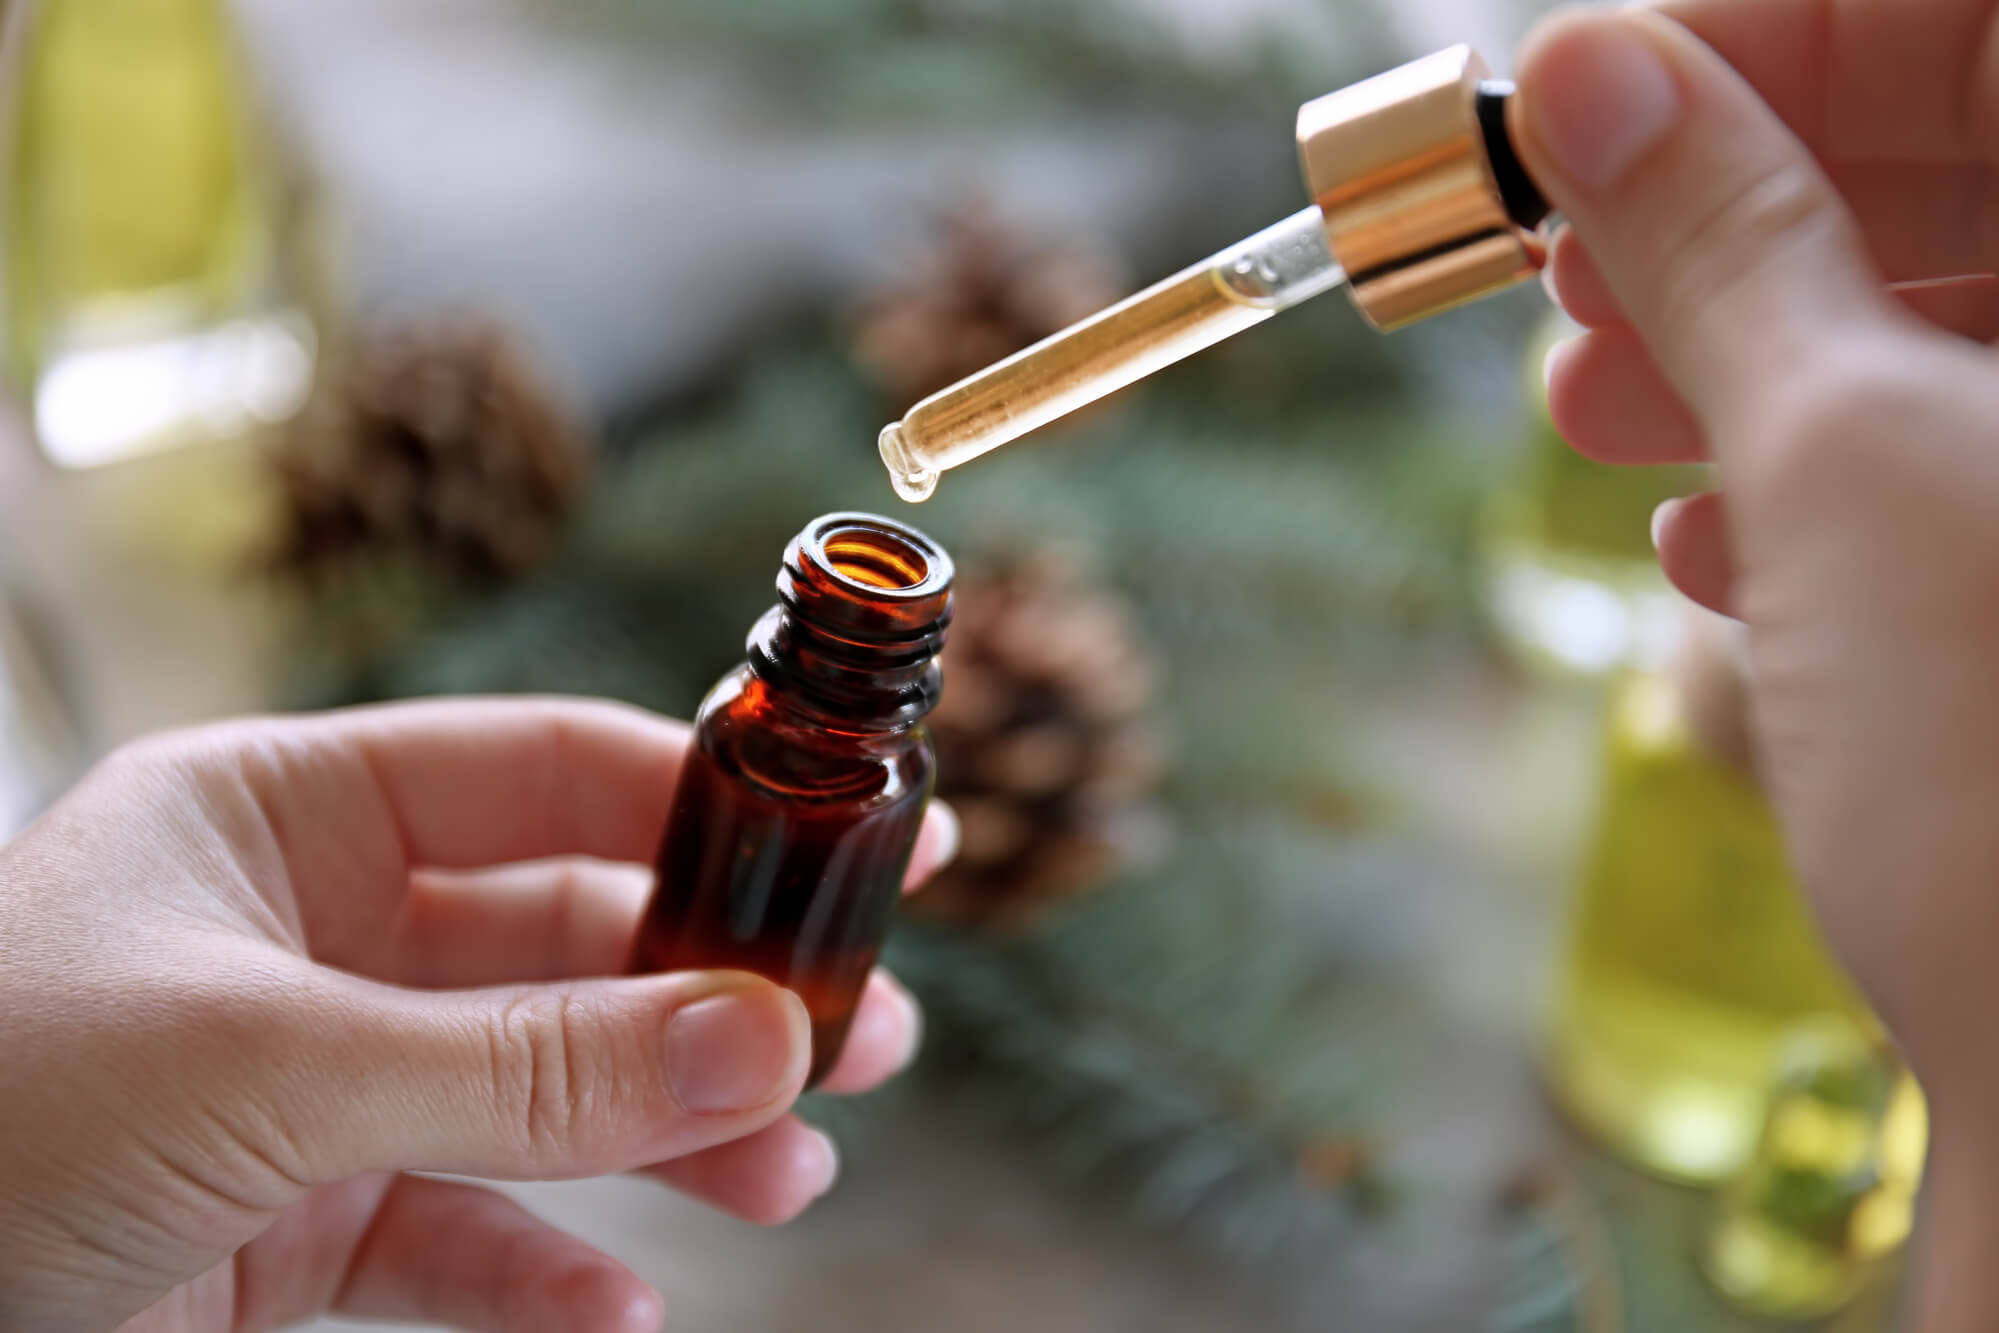 The 4 Best Essential Oils for Natural Pain Relief